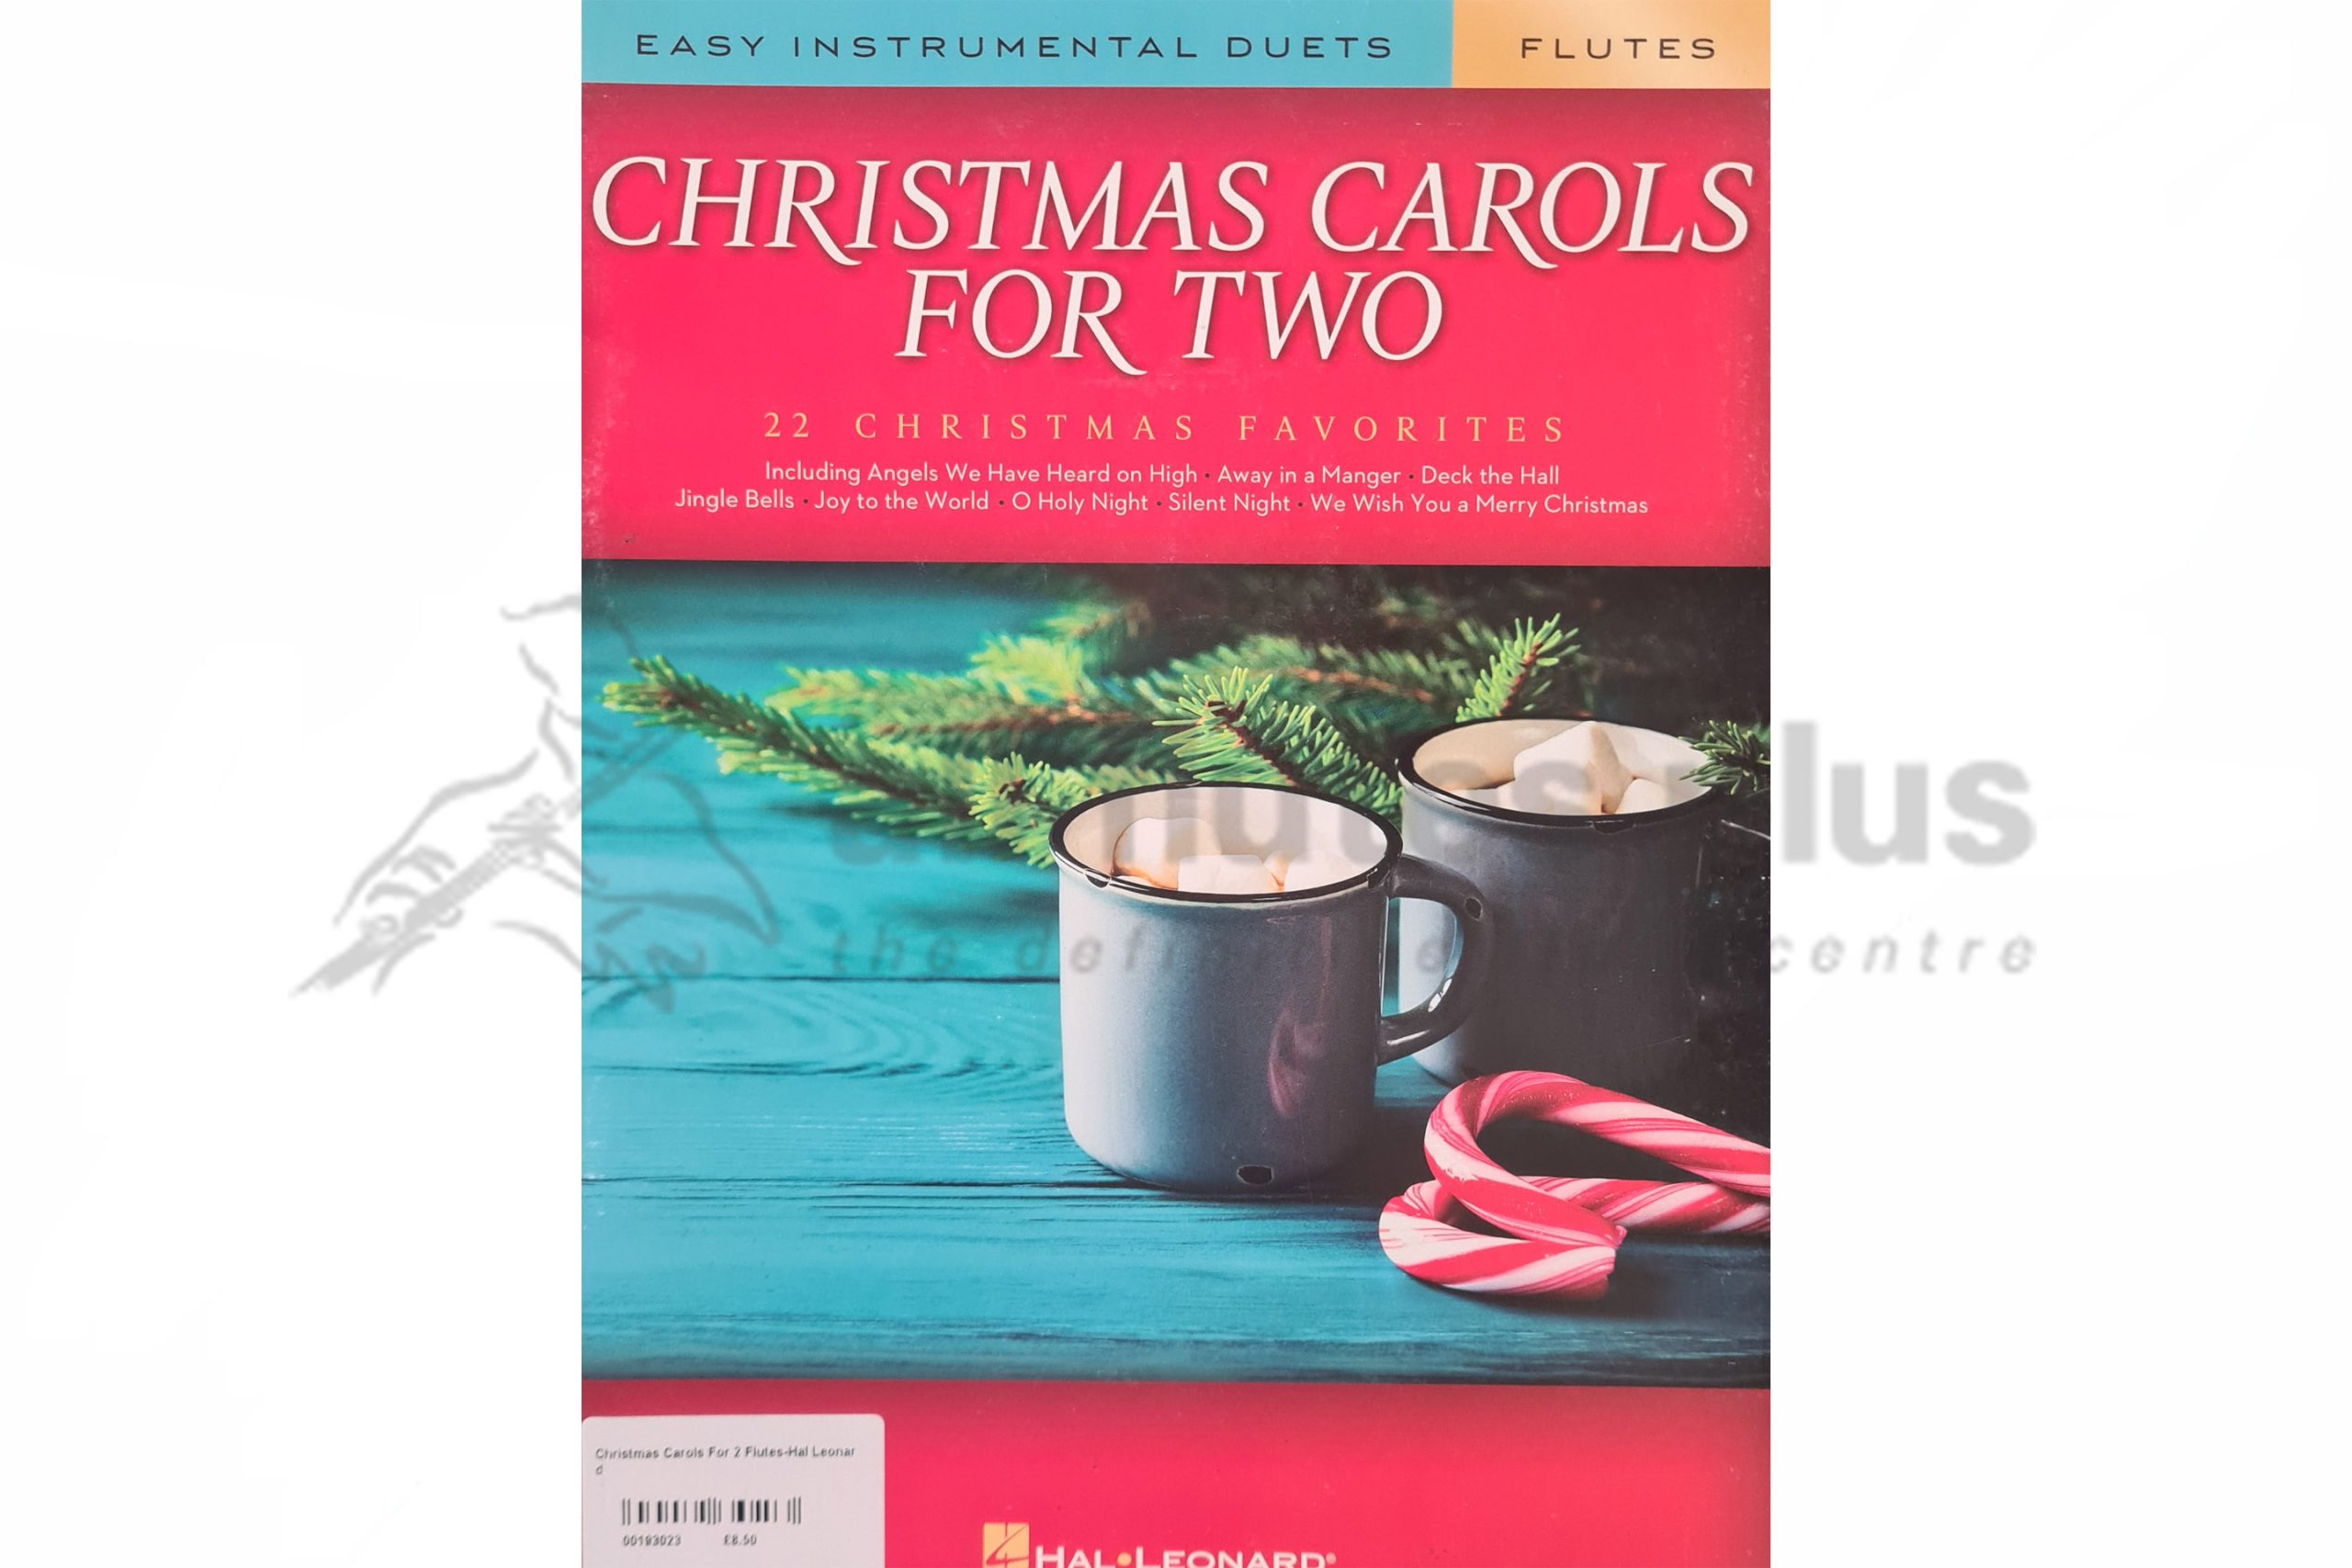 Christmas Carols for Two Flutes-Easy Instrumental Duets